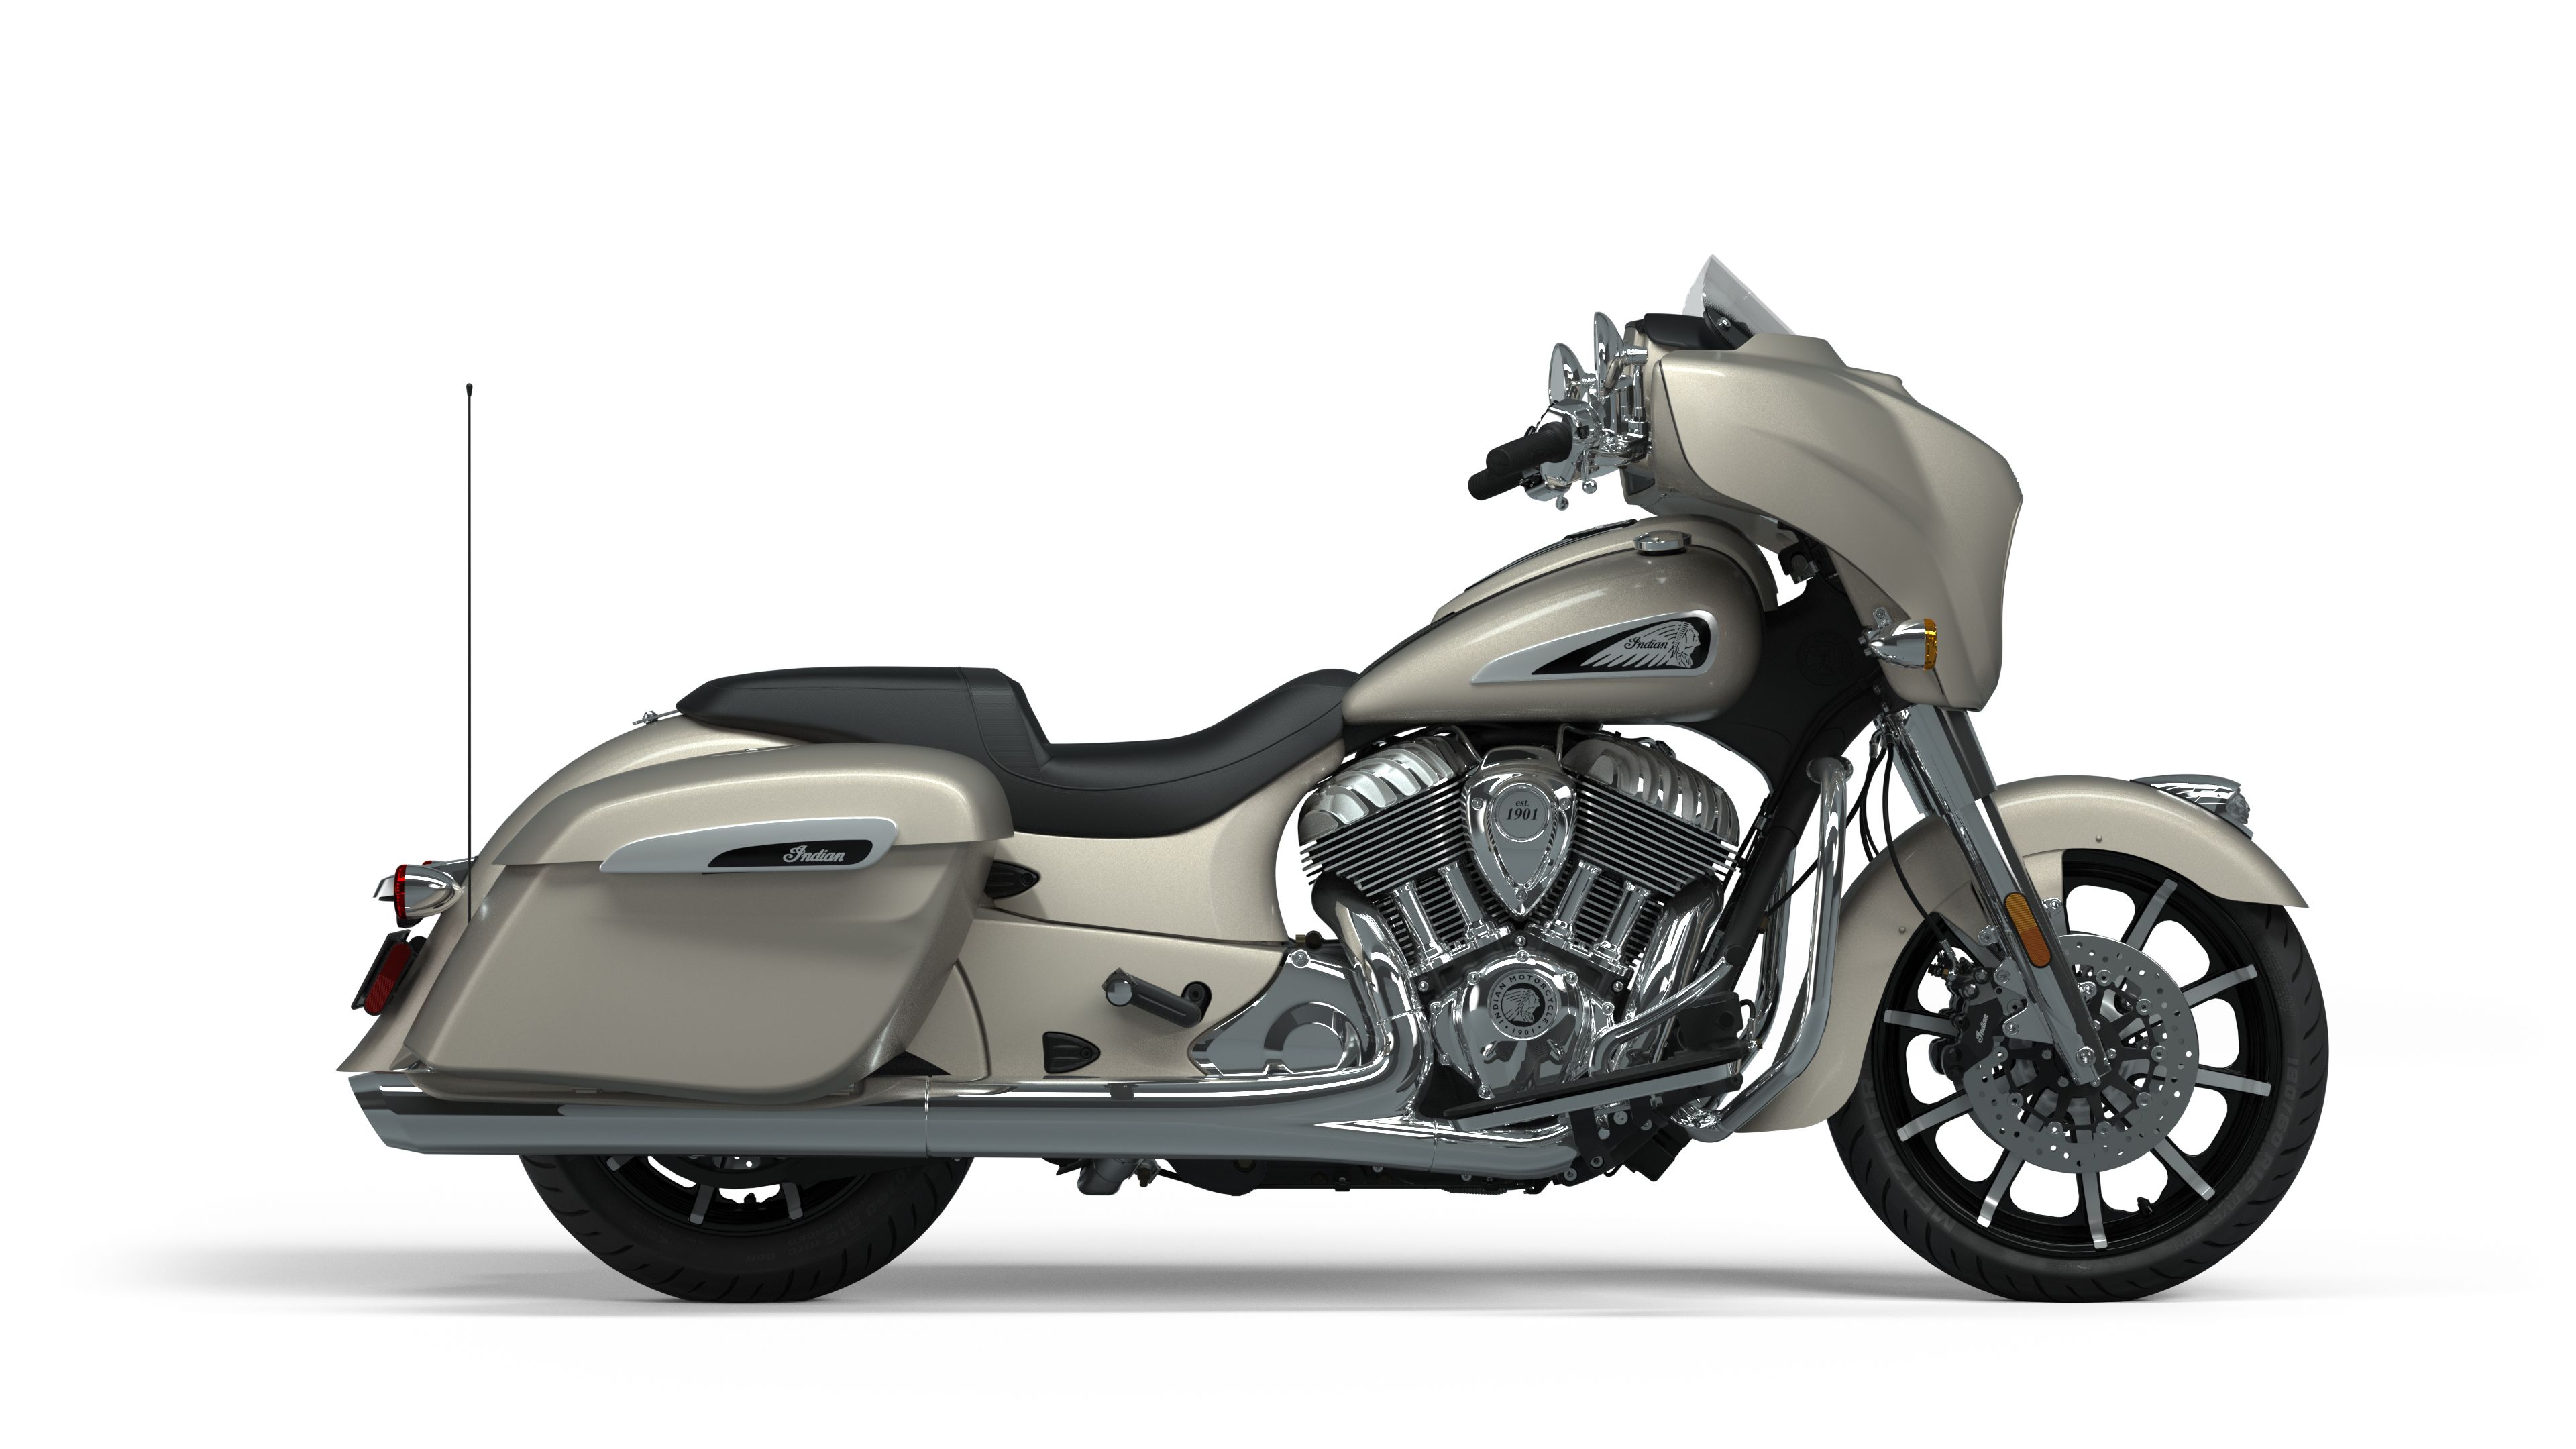 10 Things You Need To Know About The Indian Chieftain